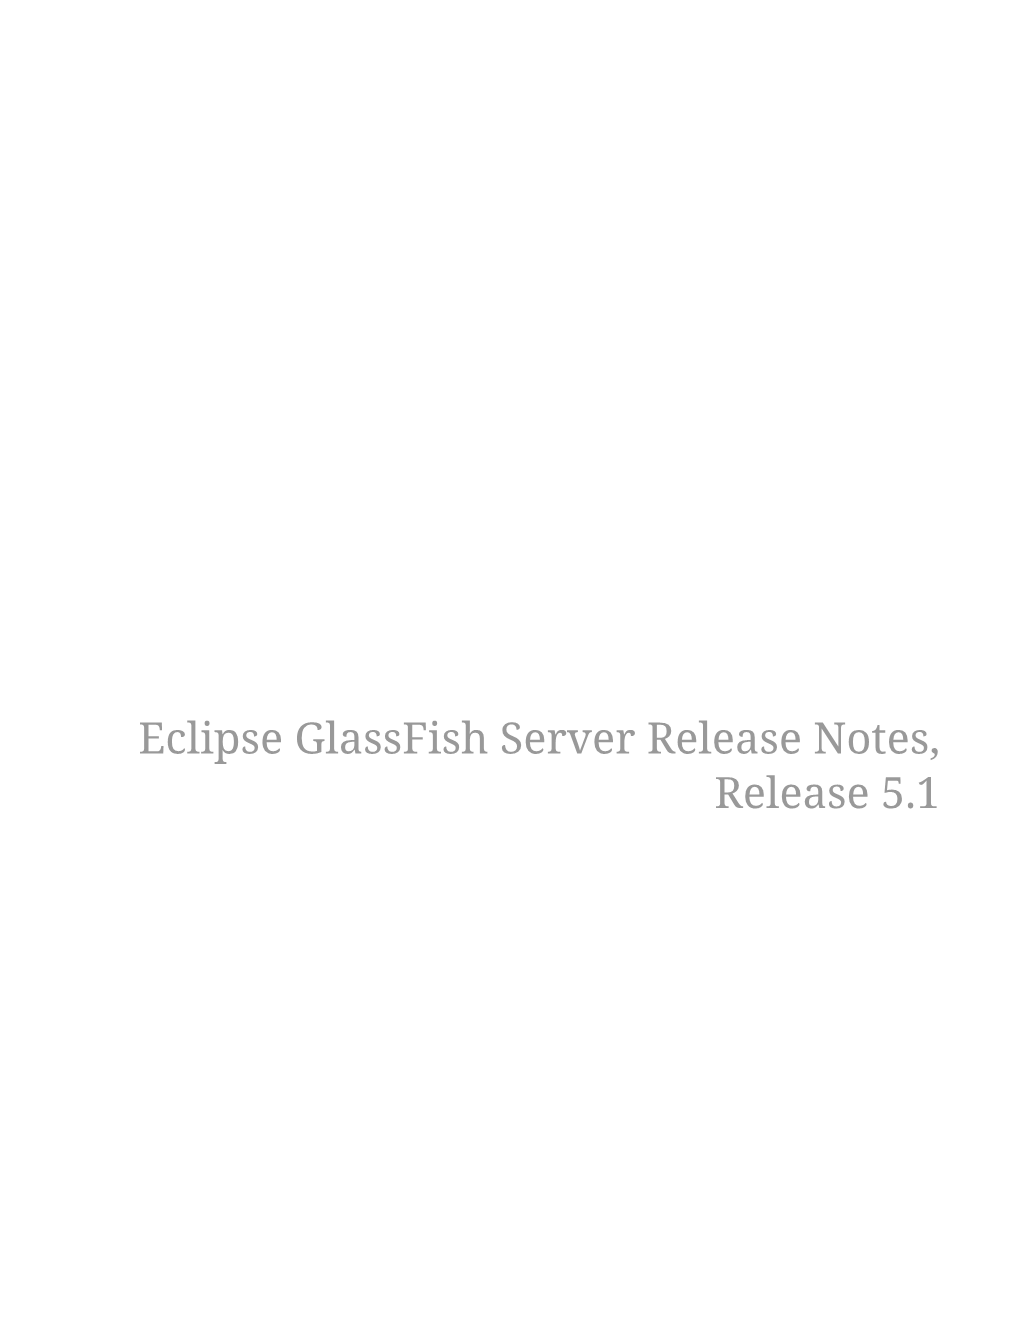 Eclipse Glassfish Server Release Notes, Release 5.1 Table of Contents